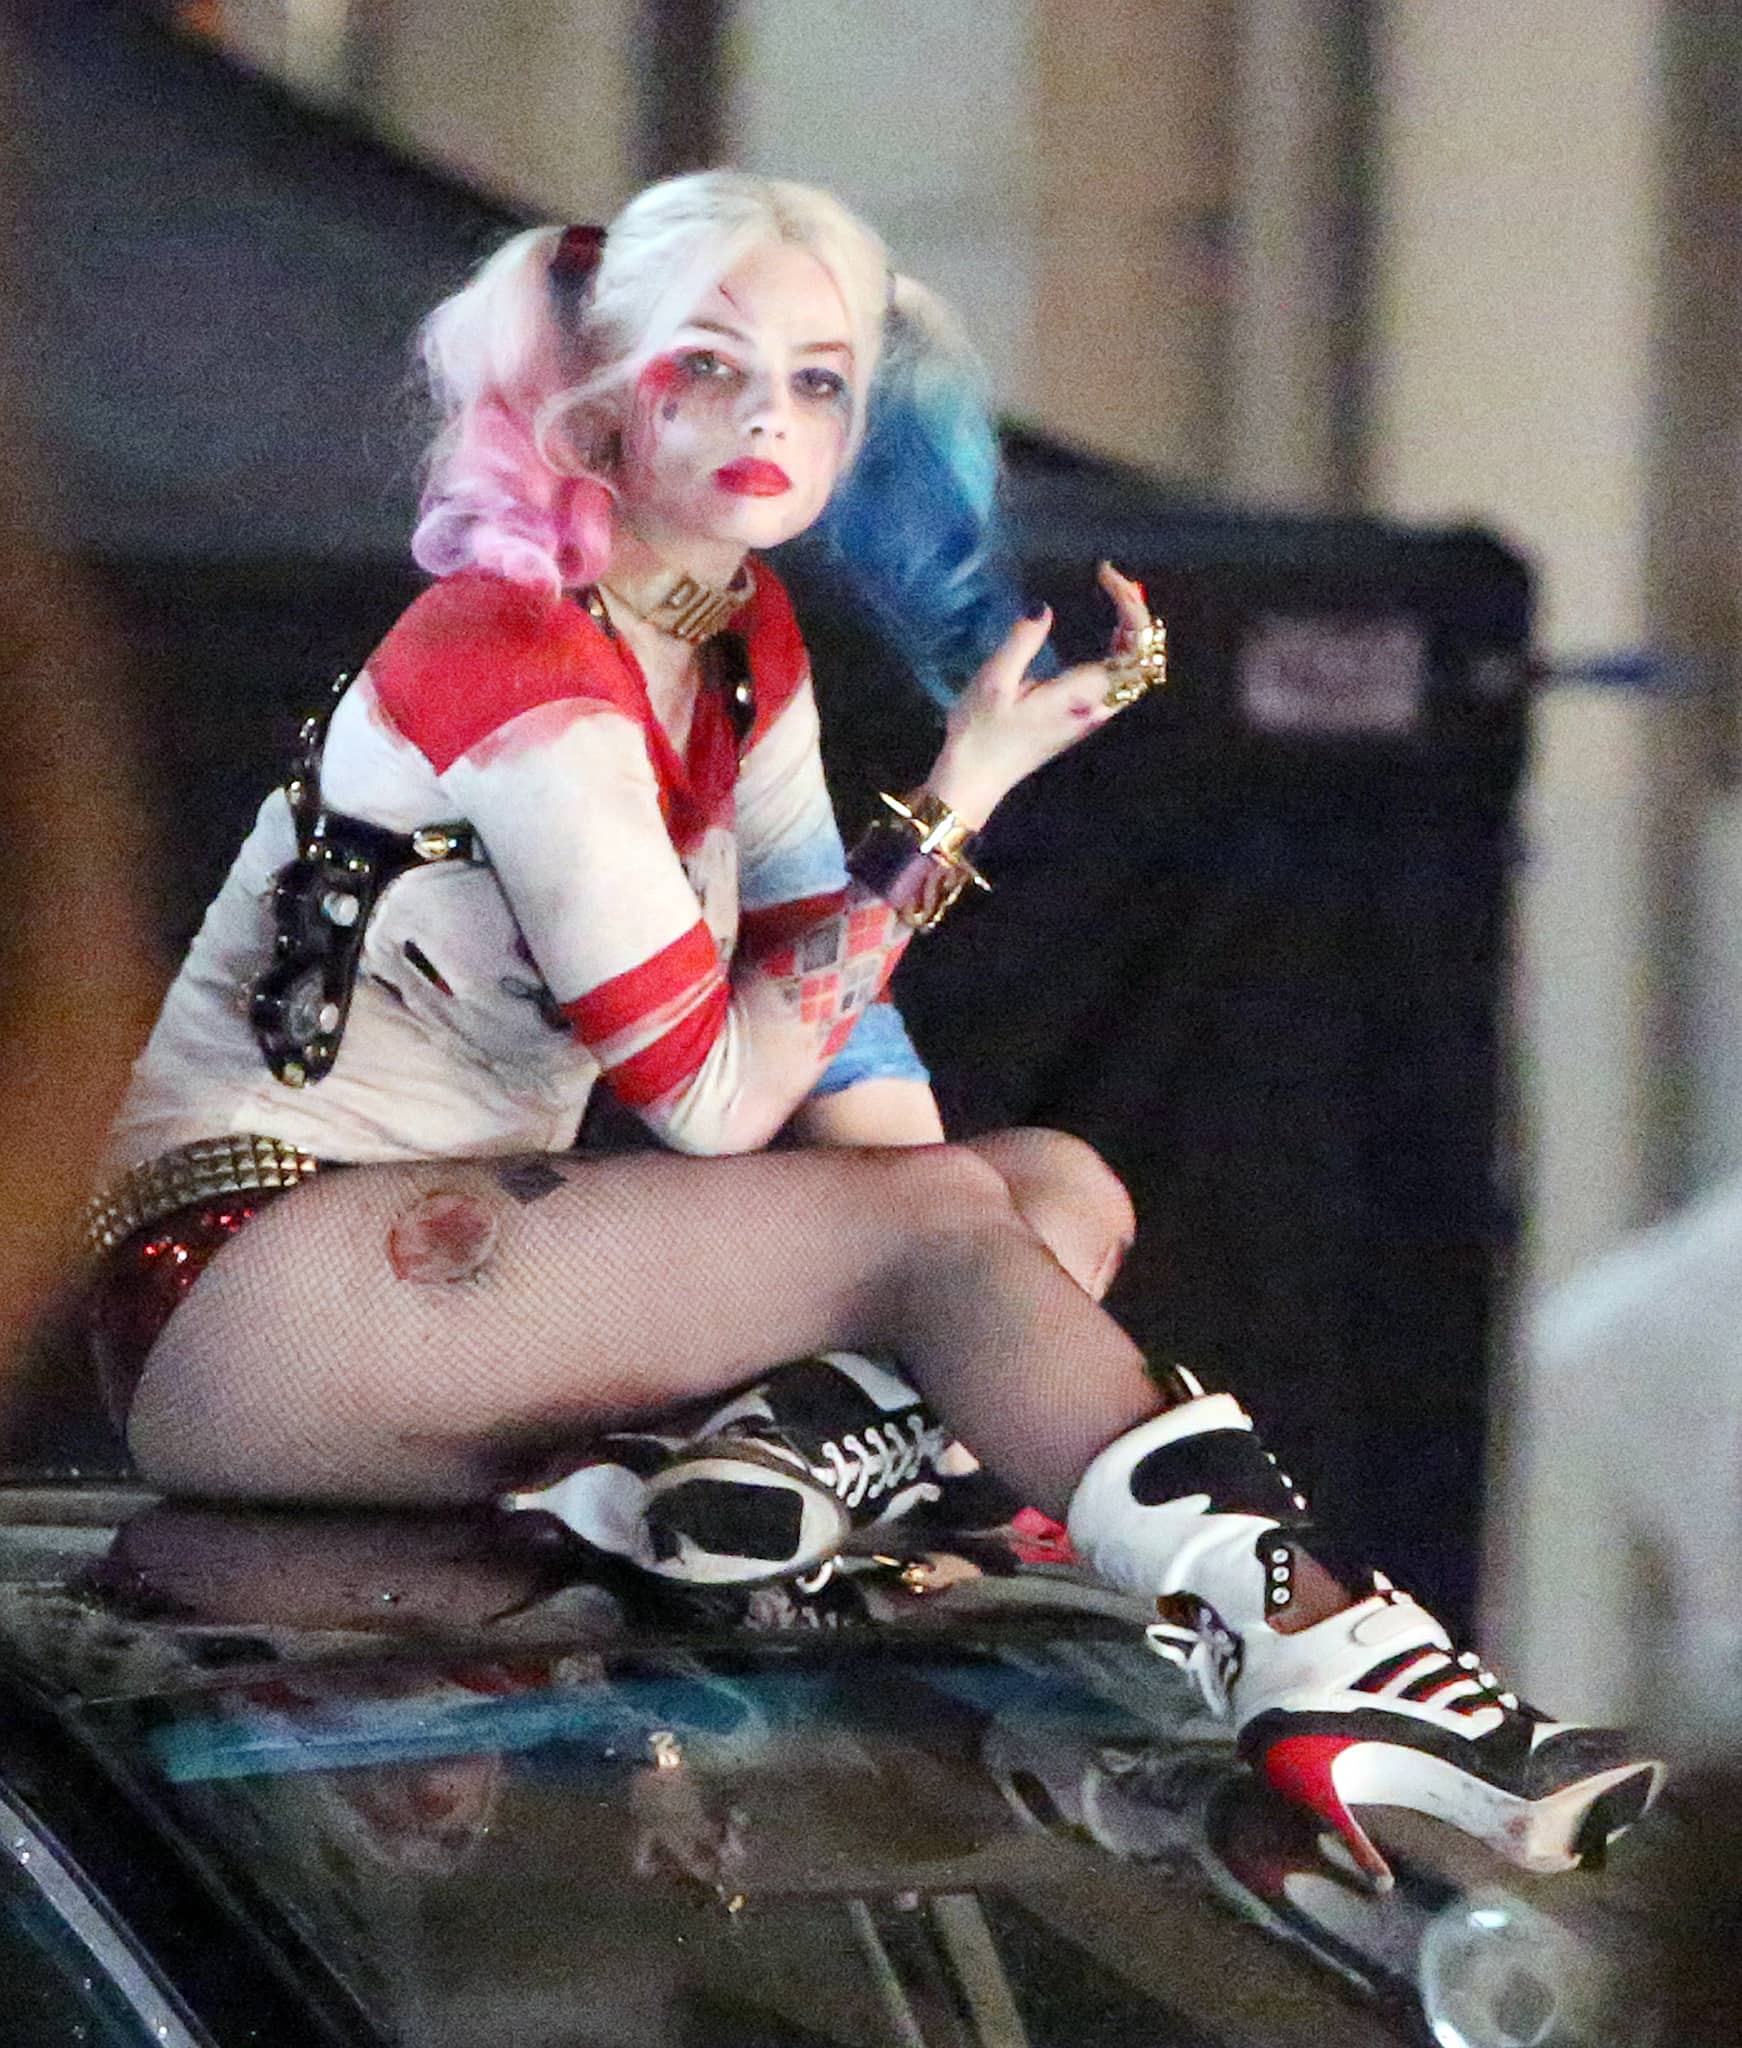 Margot Robbie as Harley Quinn in 2016's Suicide Squad, 2020's Birds of Prey, and 2021's The Suicide Squad